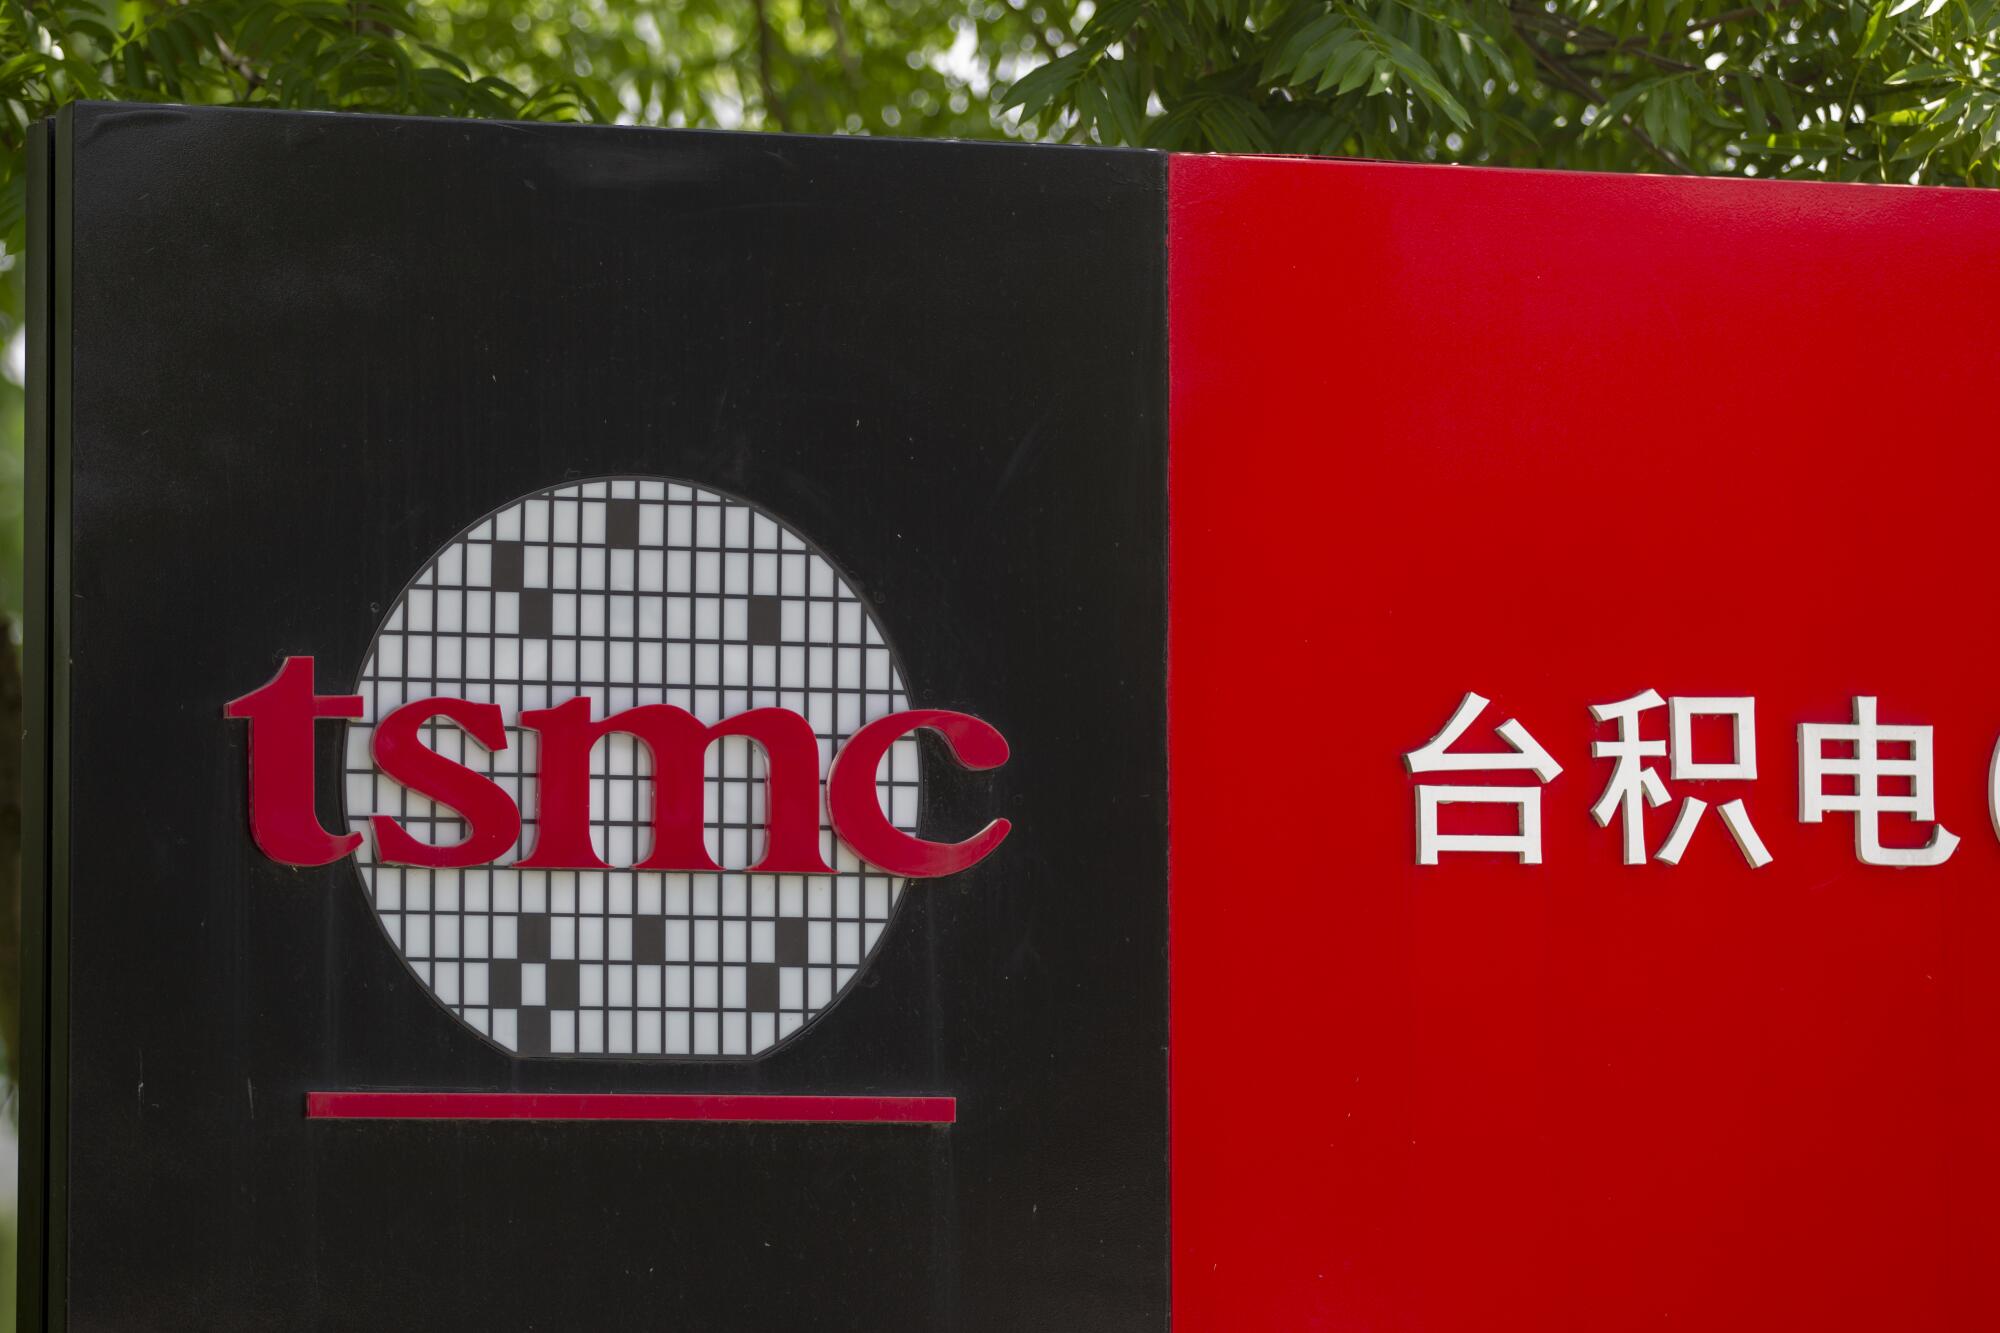 A sign with a company logo with the lowercase letters t-s-m-c next to white Chinese characters on a red background